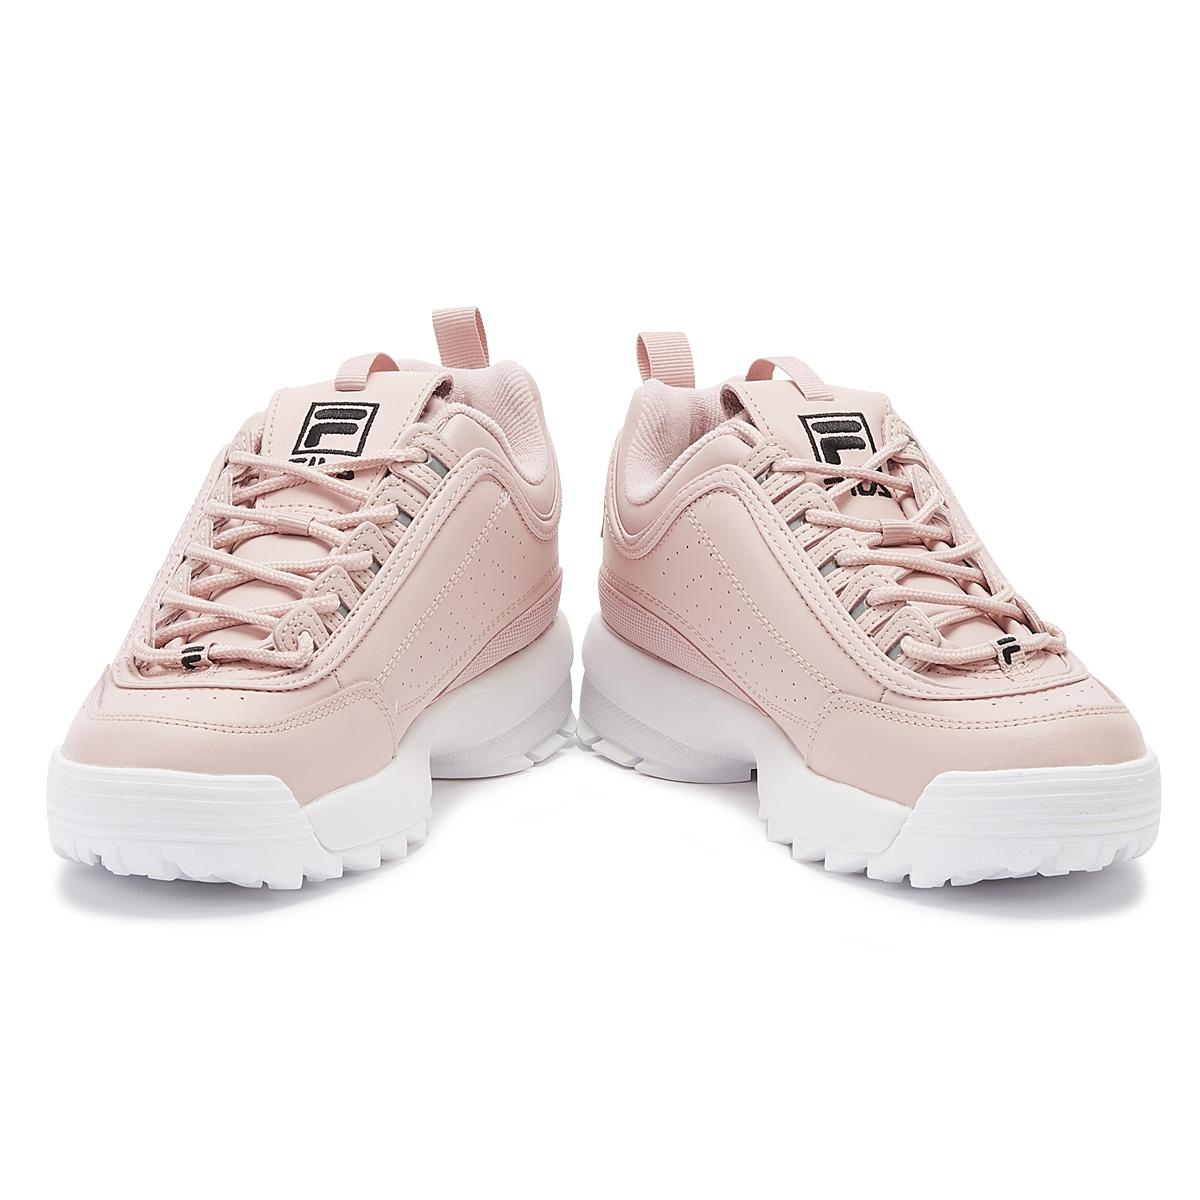 Fila Leather Disruptor Ii 3d Embroider Sneakers in Pink - Lyst